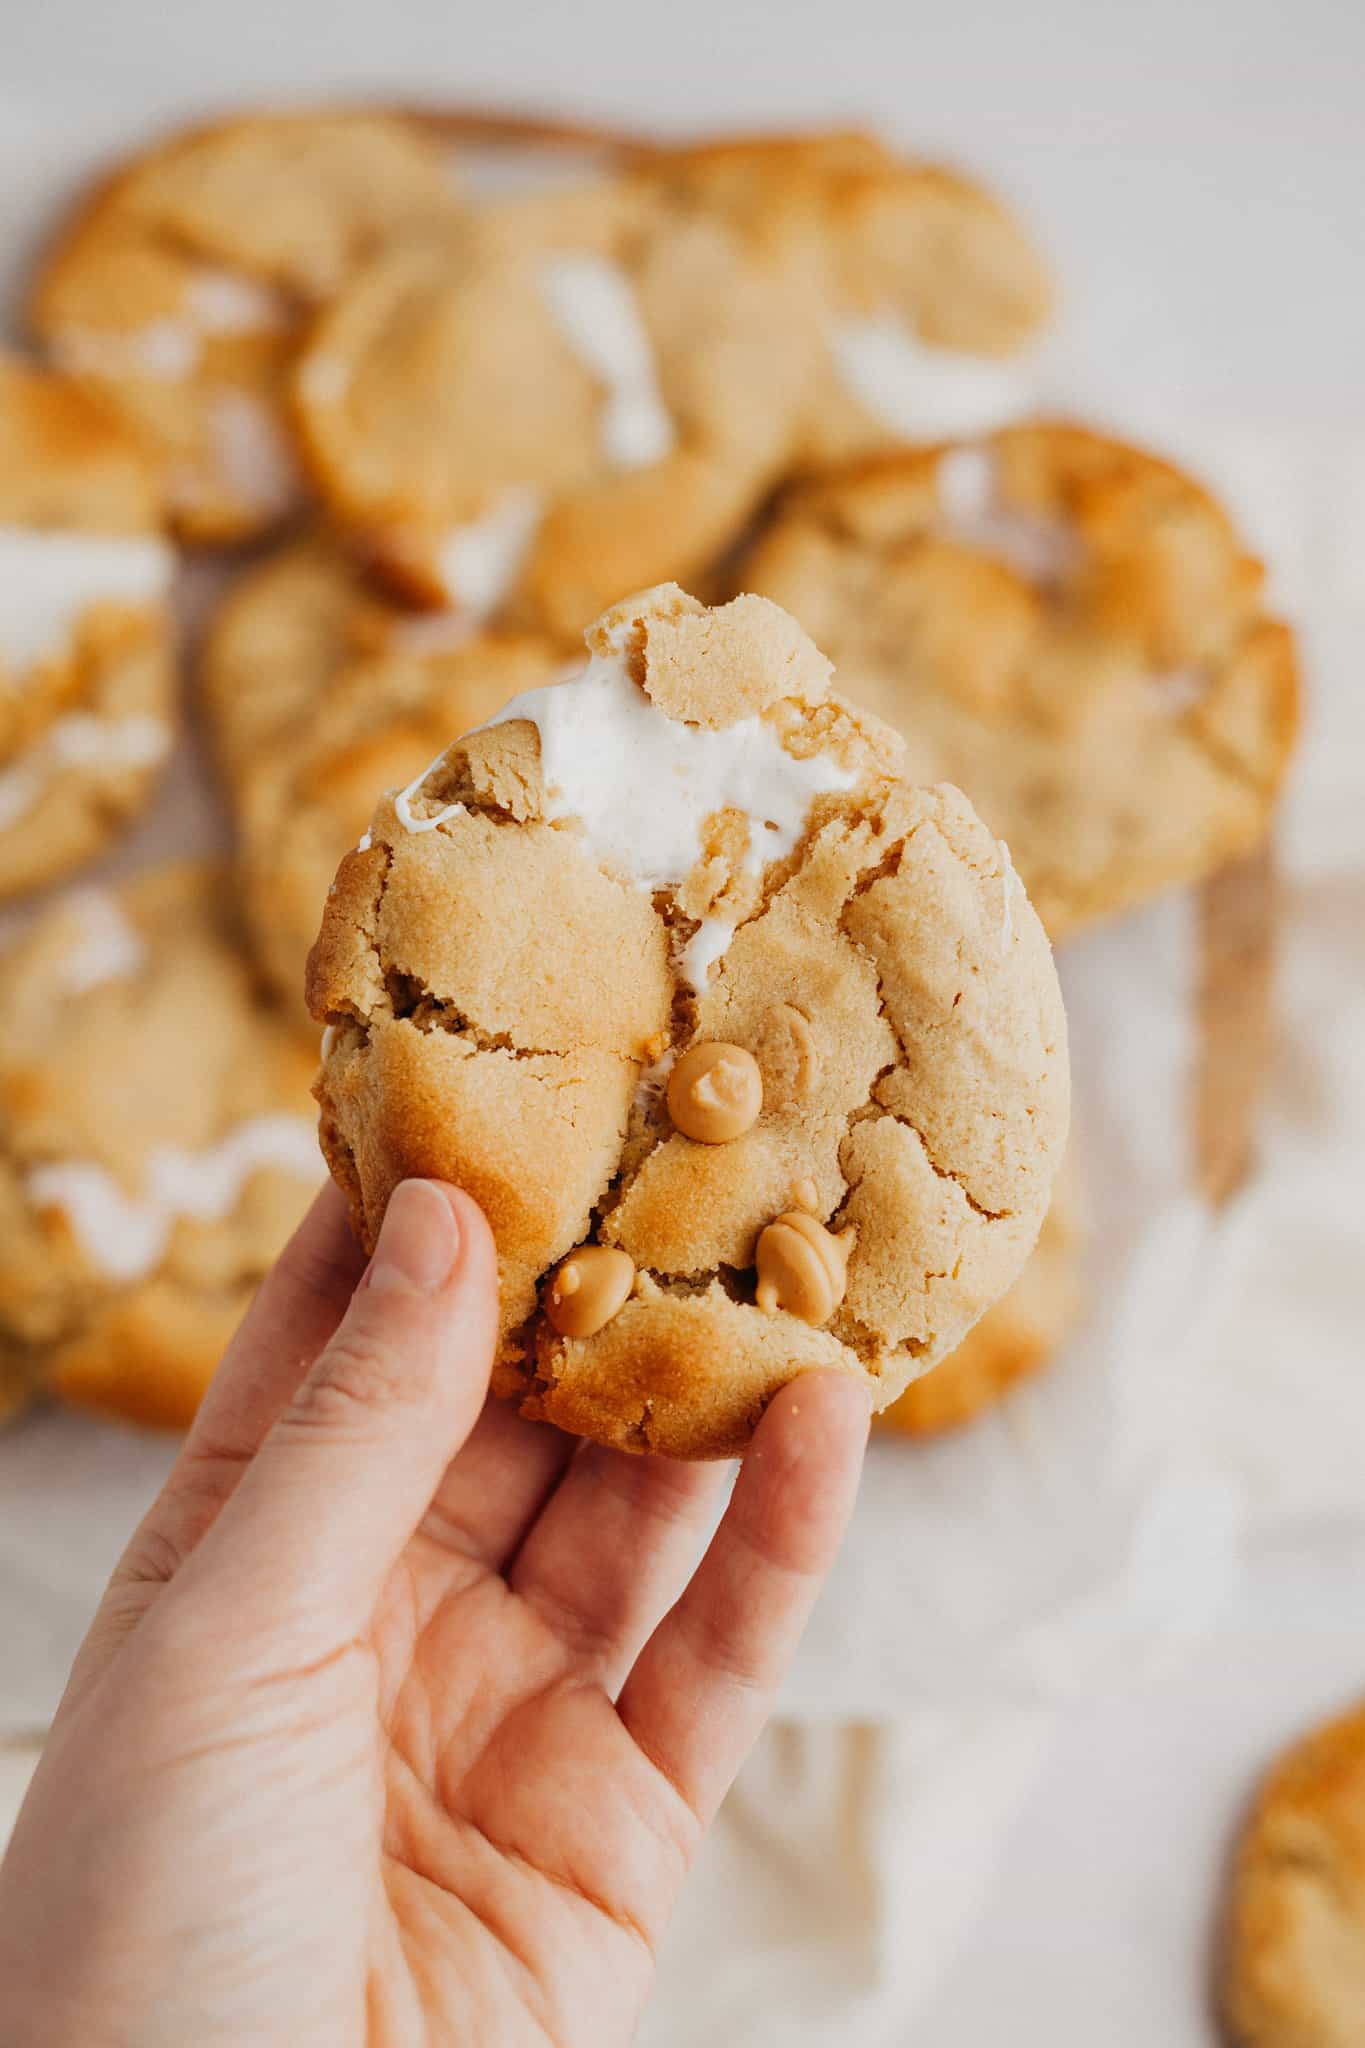 A hand holding a fluffernutter cookie. You can see other cookies in the background.